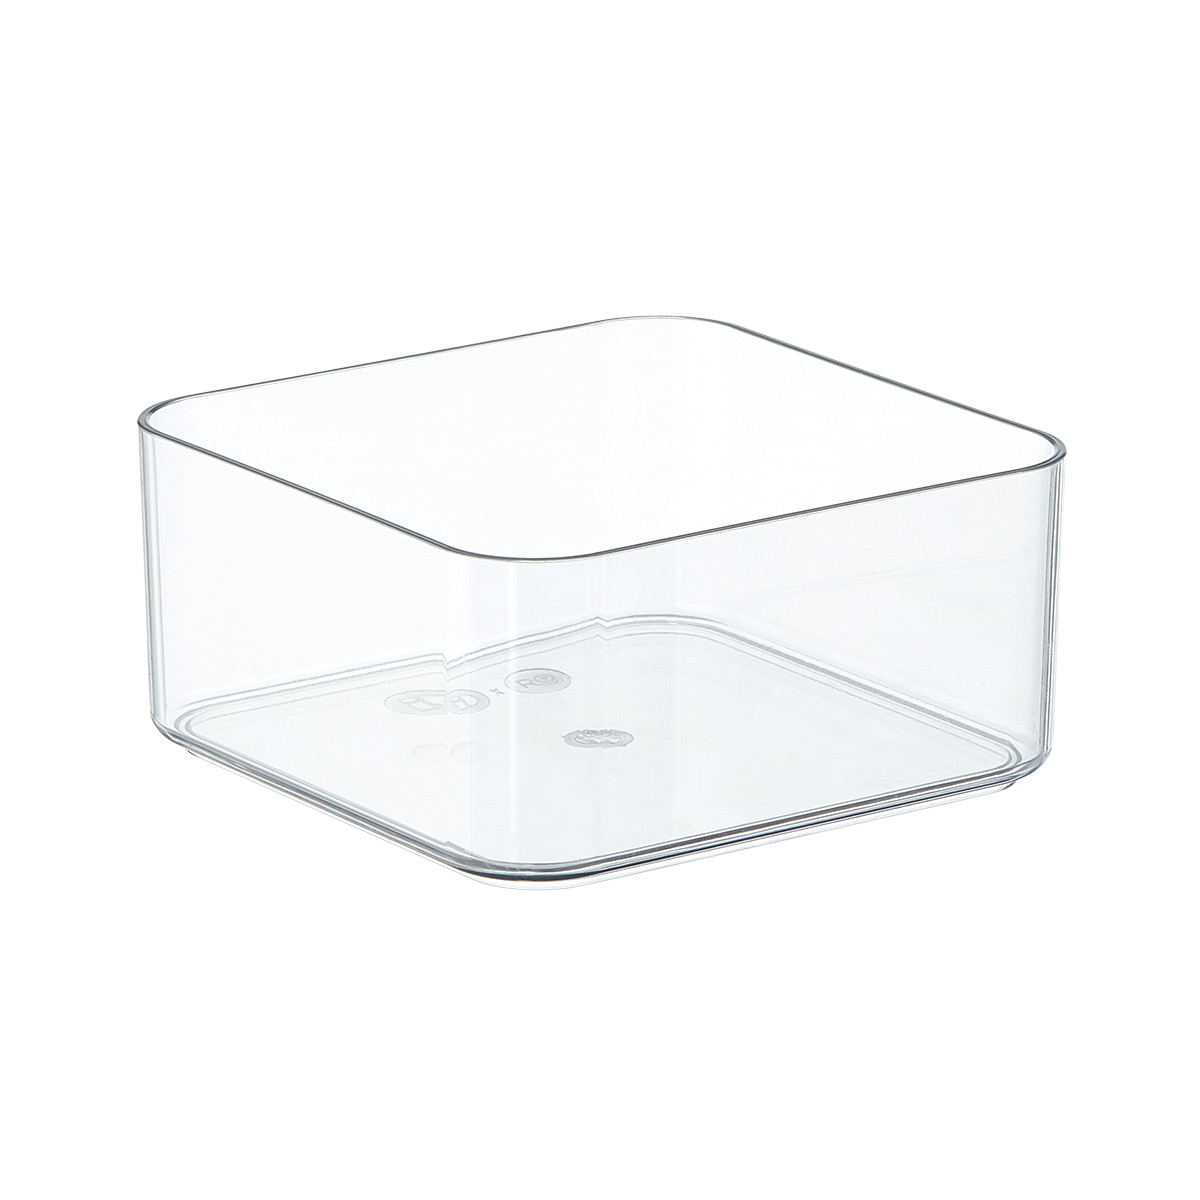 https://www.containerstore.com/catalogimages/451662/10088748_RO_Bin_Insert_Clear.jpg